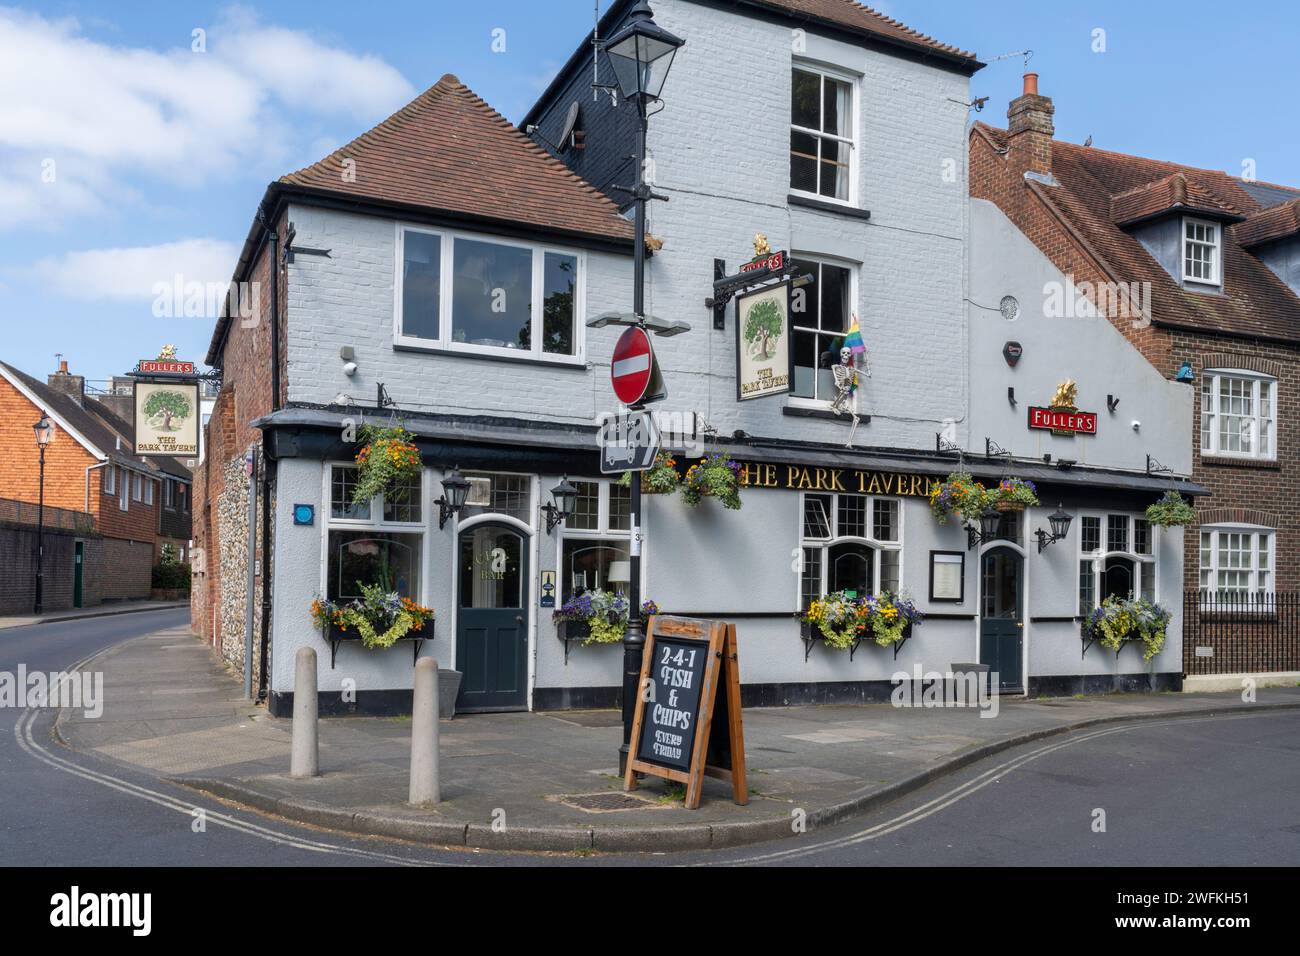 The Park Tavern situated at a junction of Priory Road, St Peters Street and St Martin's Square and opposite Priory Park in the historical Chichester. Stock Photo